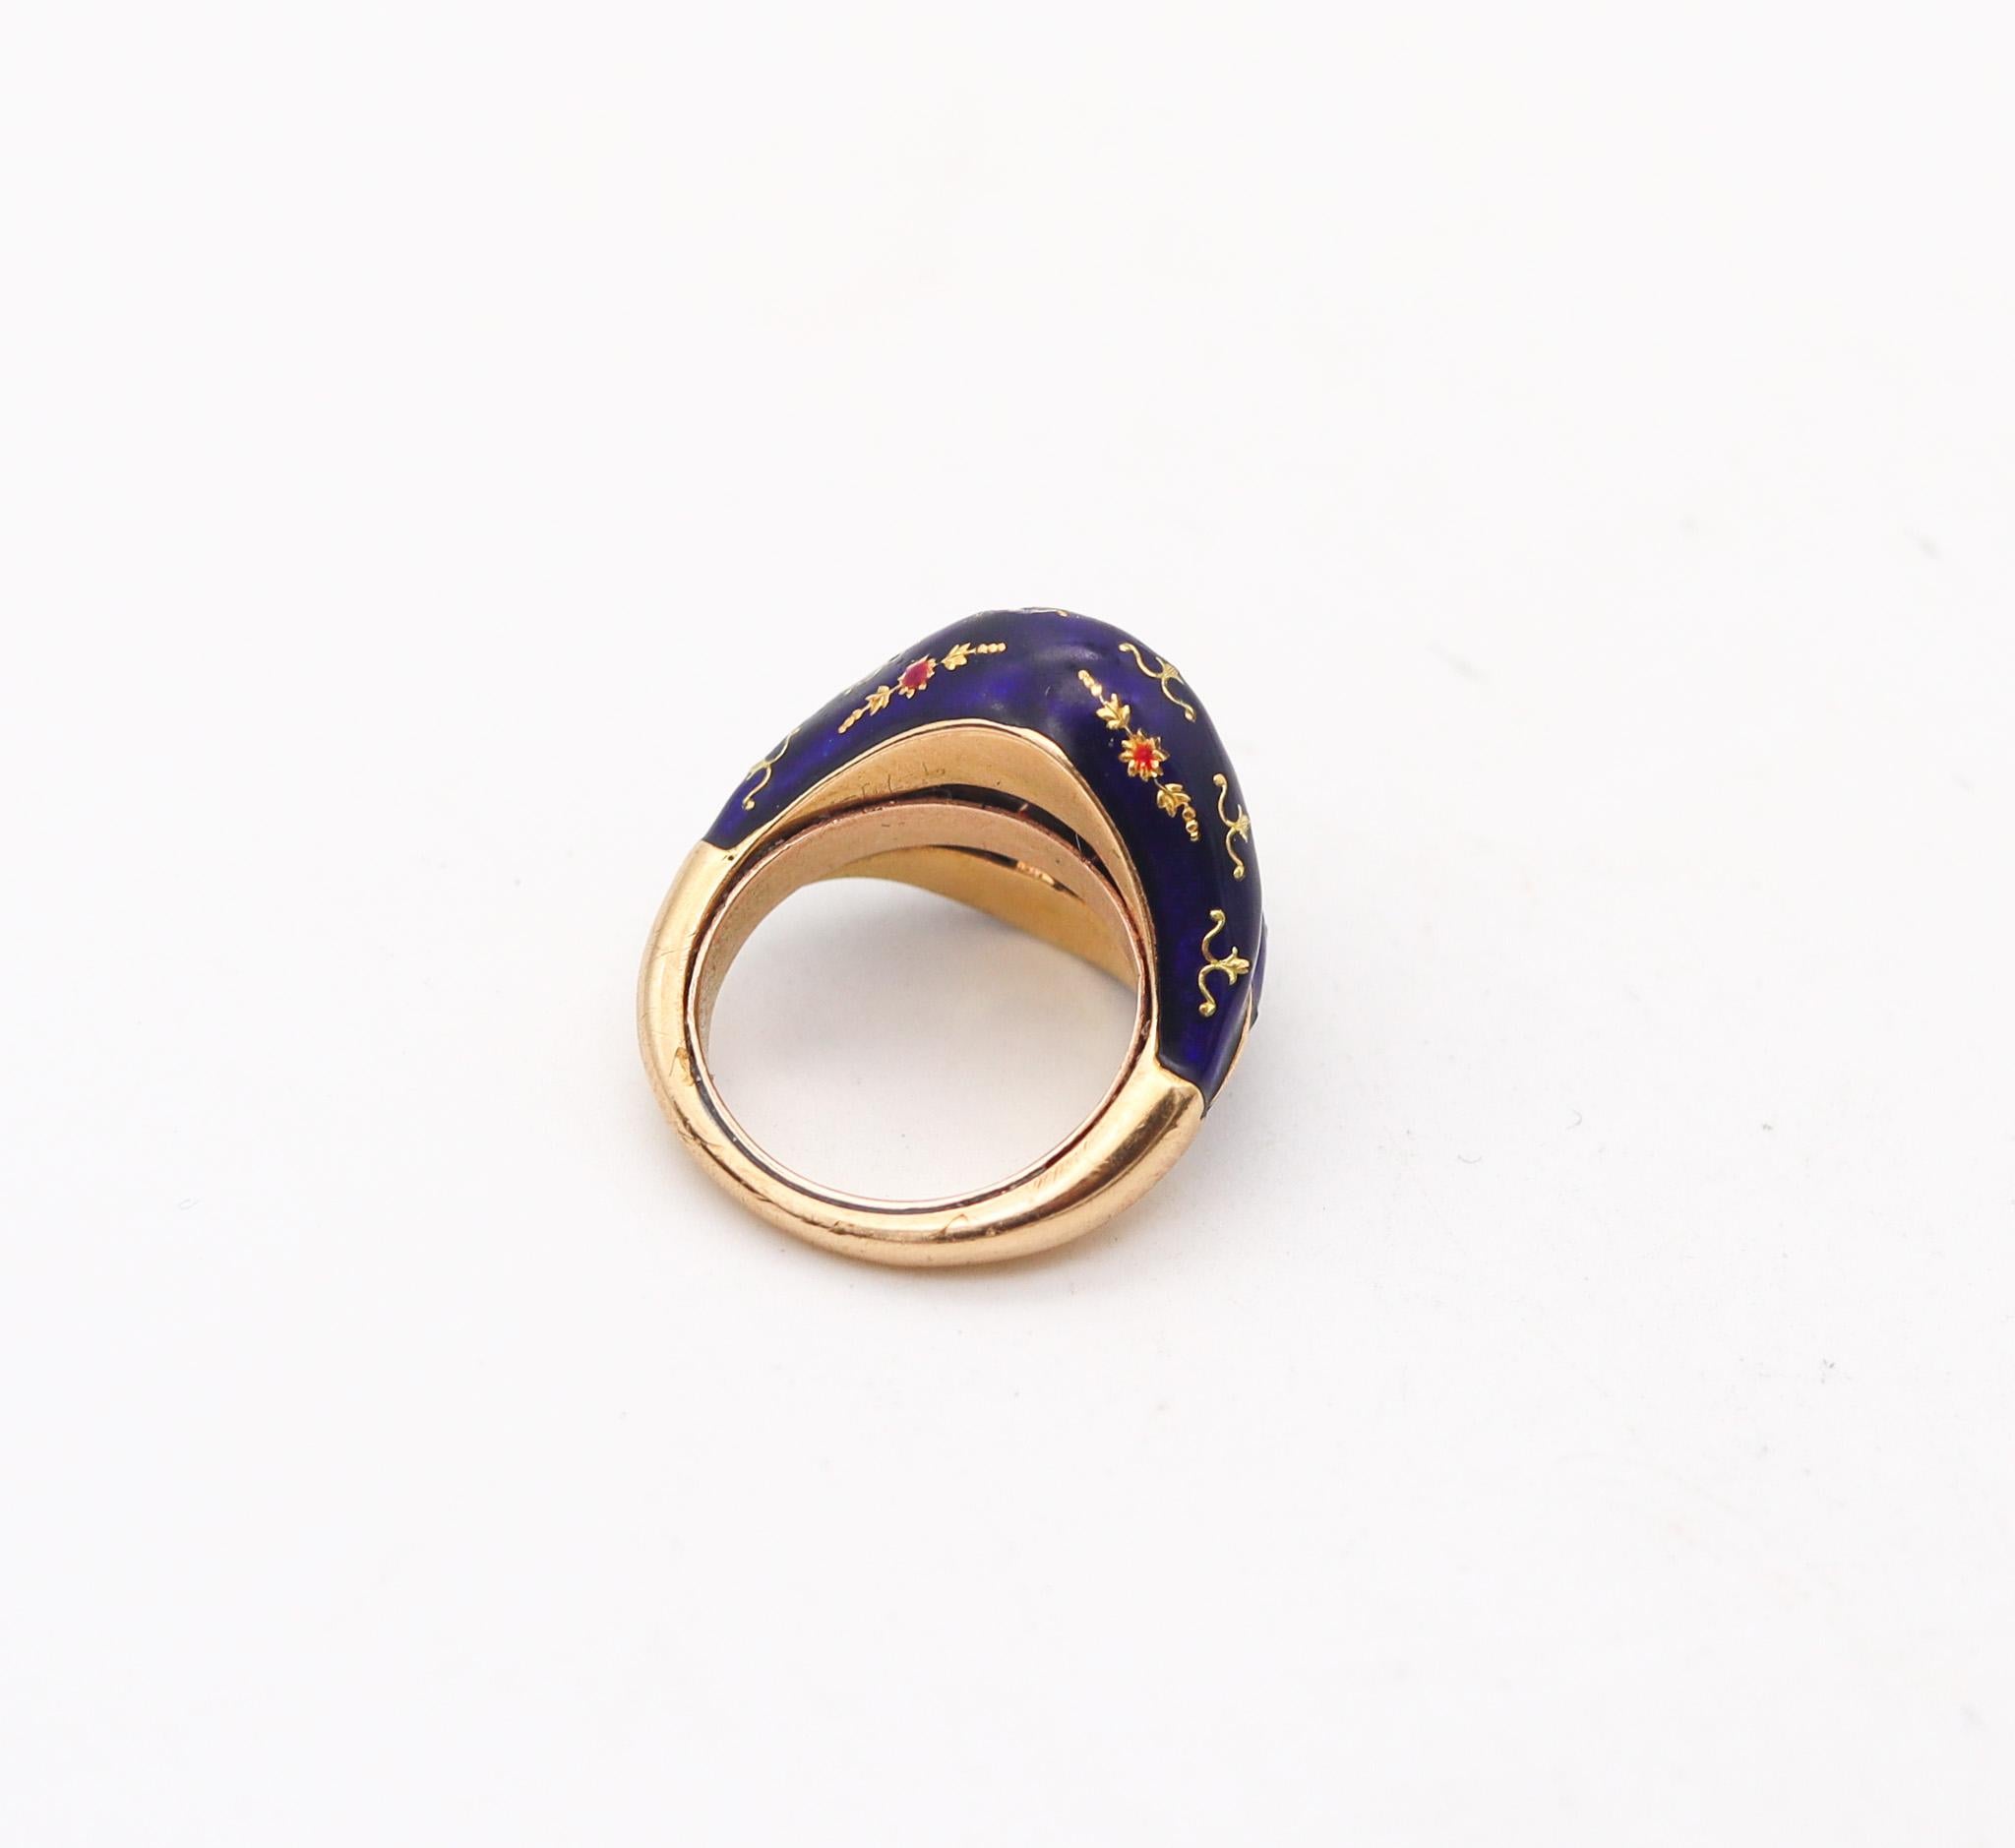 Women's Victorian 1880 Blue Enameled Celestial Ring In 15Kt Gold With Rubies And Diamond